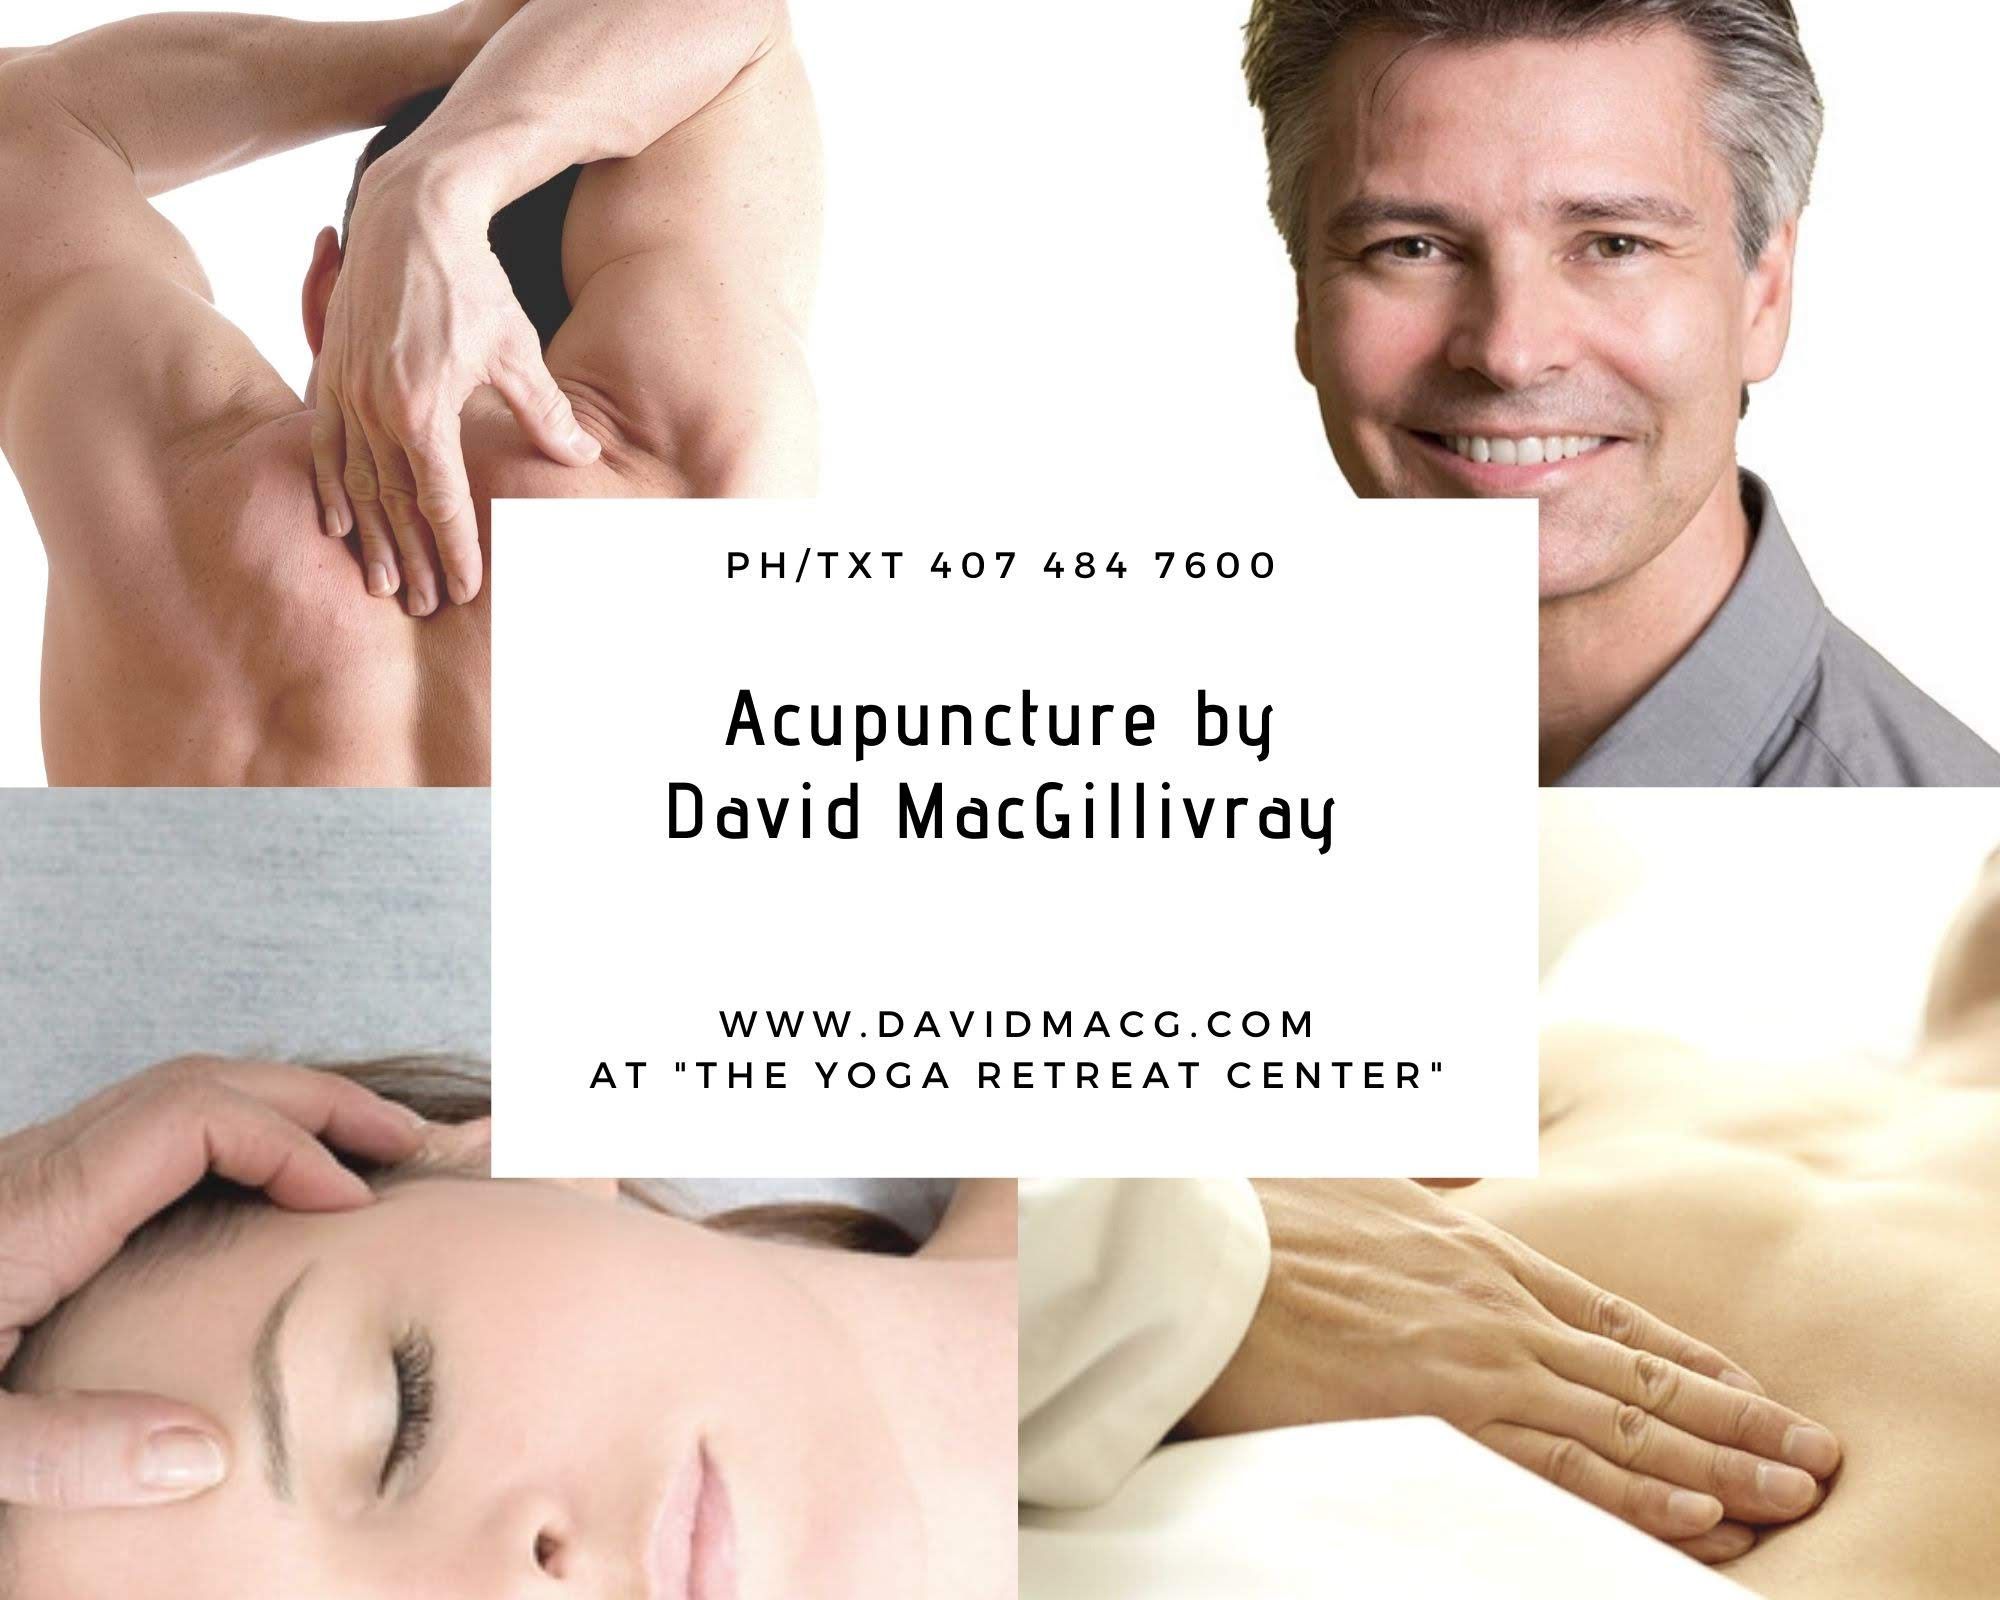 Acupuncture by David MacGillivray